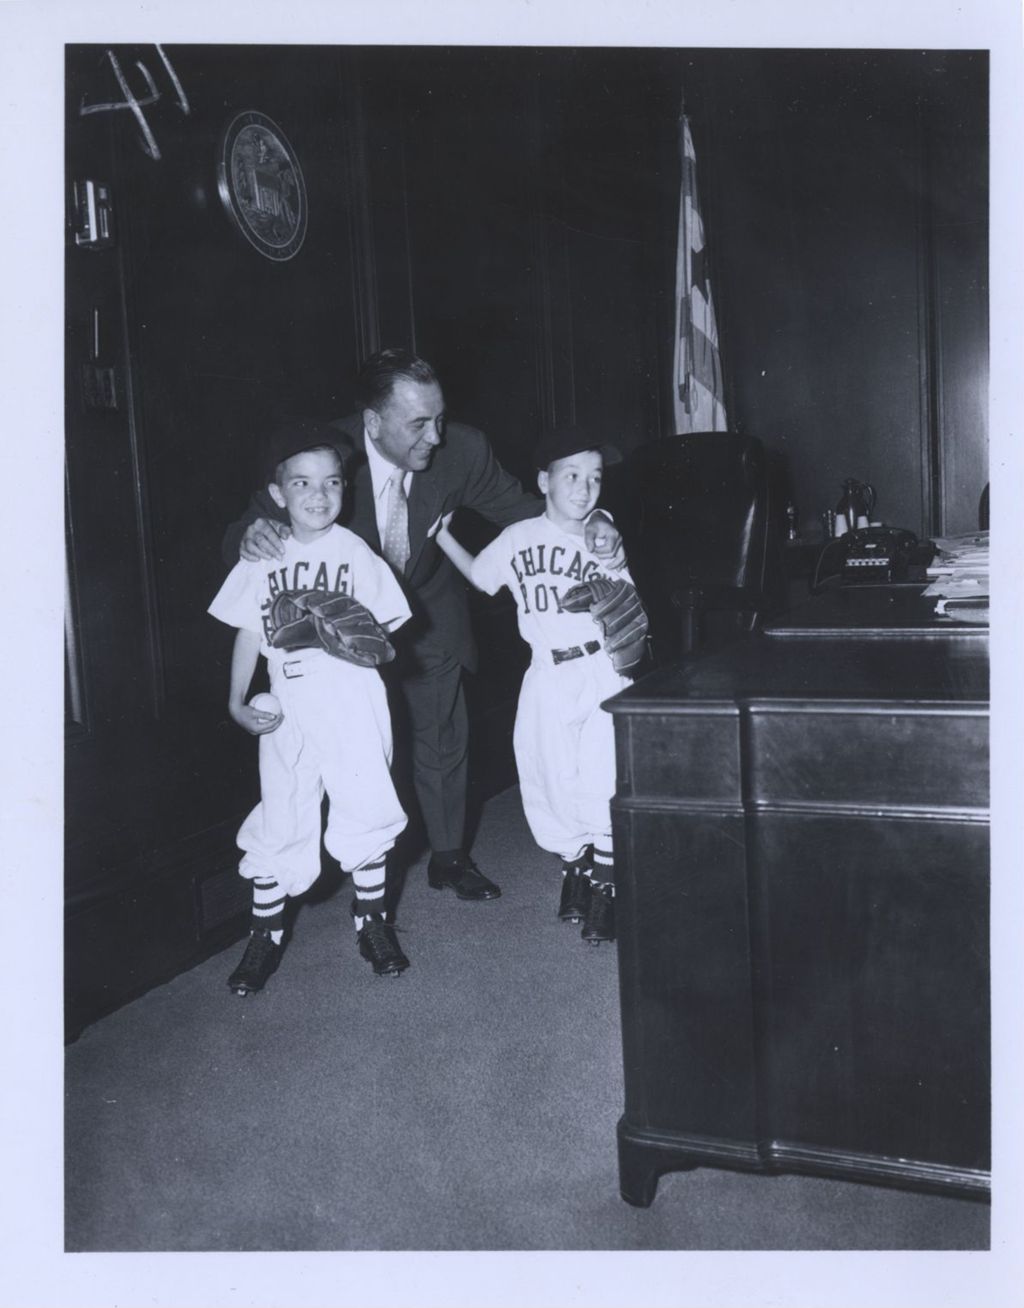 Miniature of Richard J. Daley with his sons in Chicago Police baseball uniforms